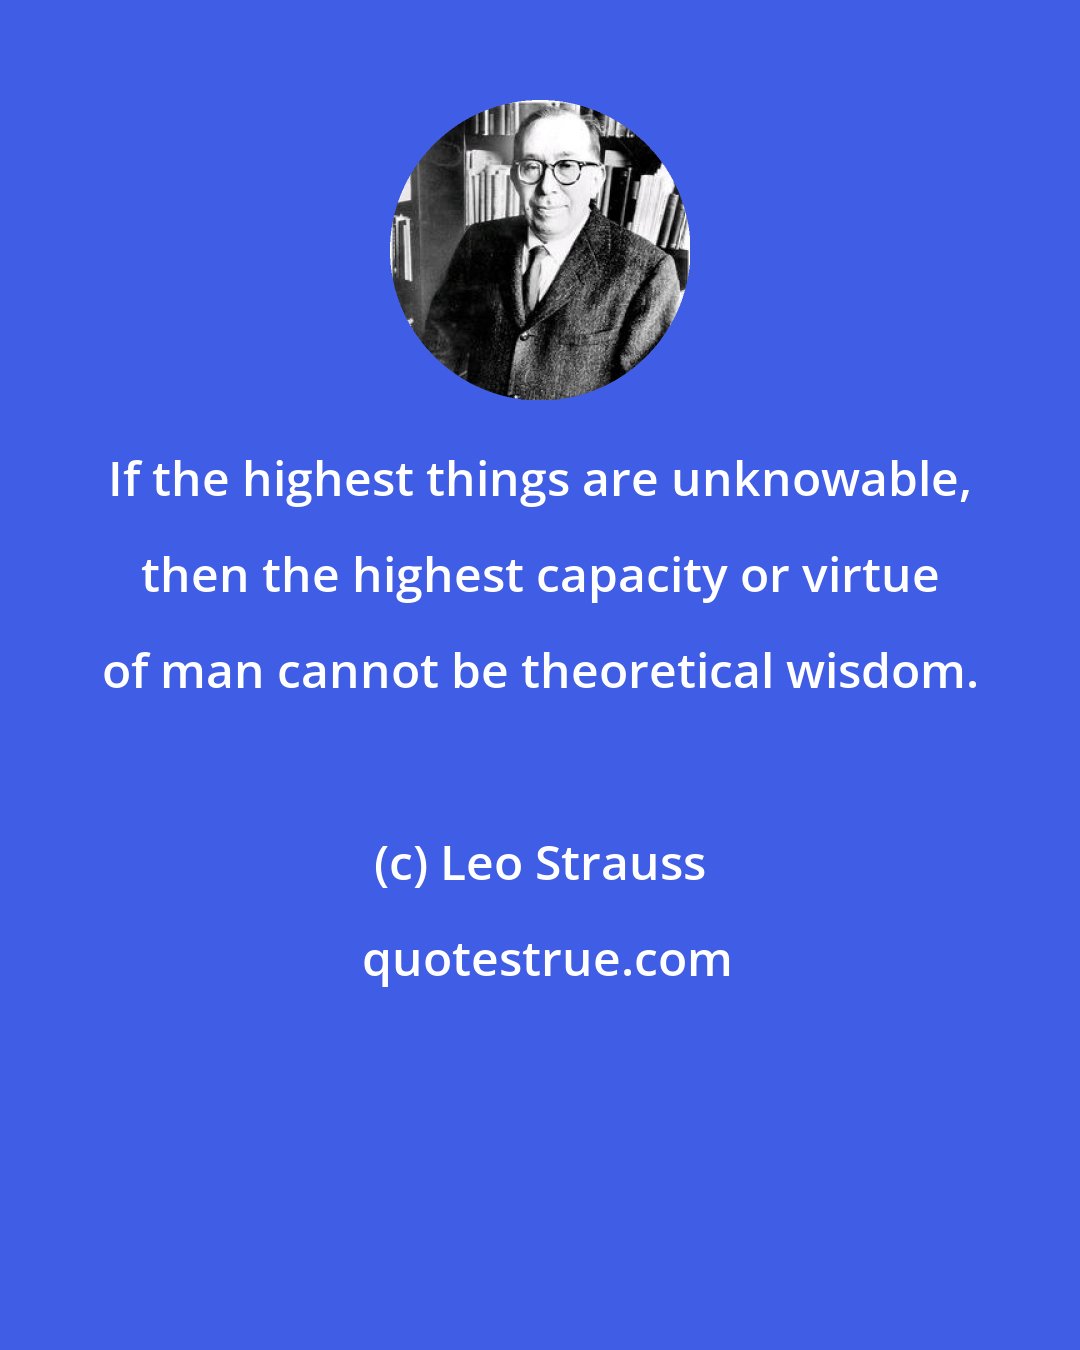 Leo Strauss: If the highest things are unknowable, then the highest capacity or virtue of man cannot be theoretical wisdom.